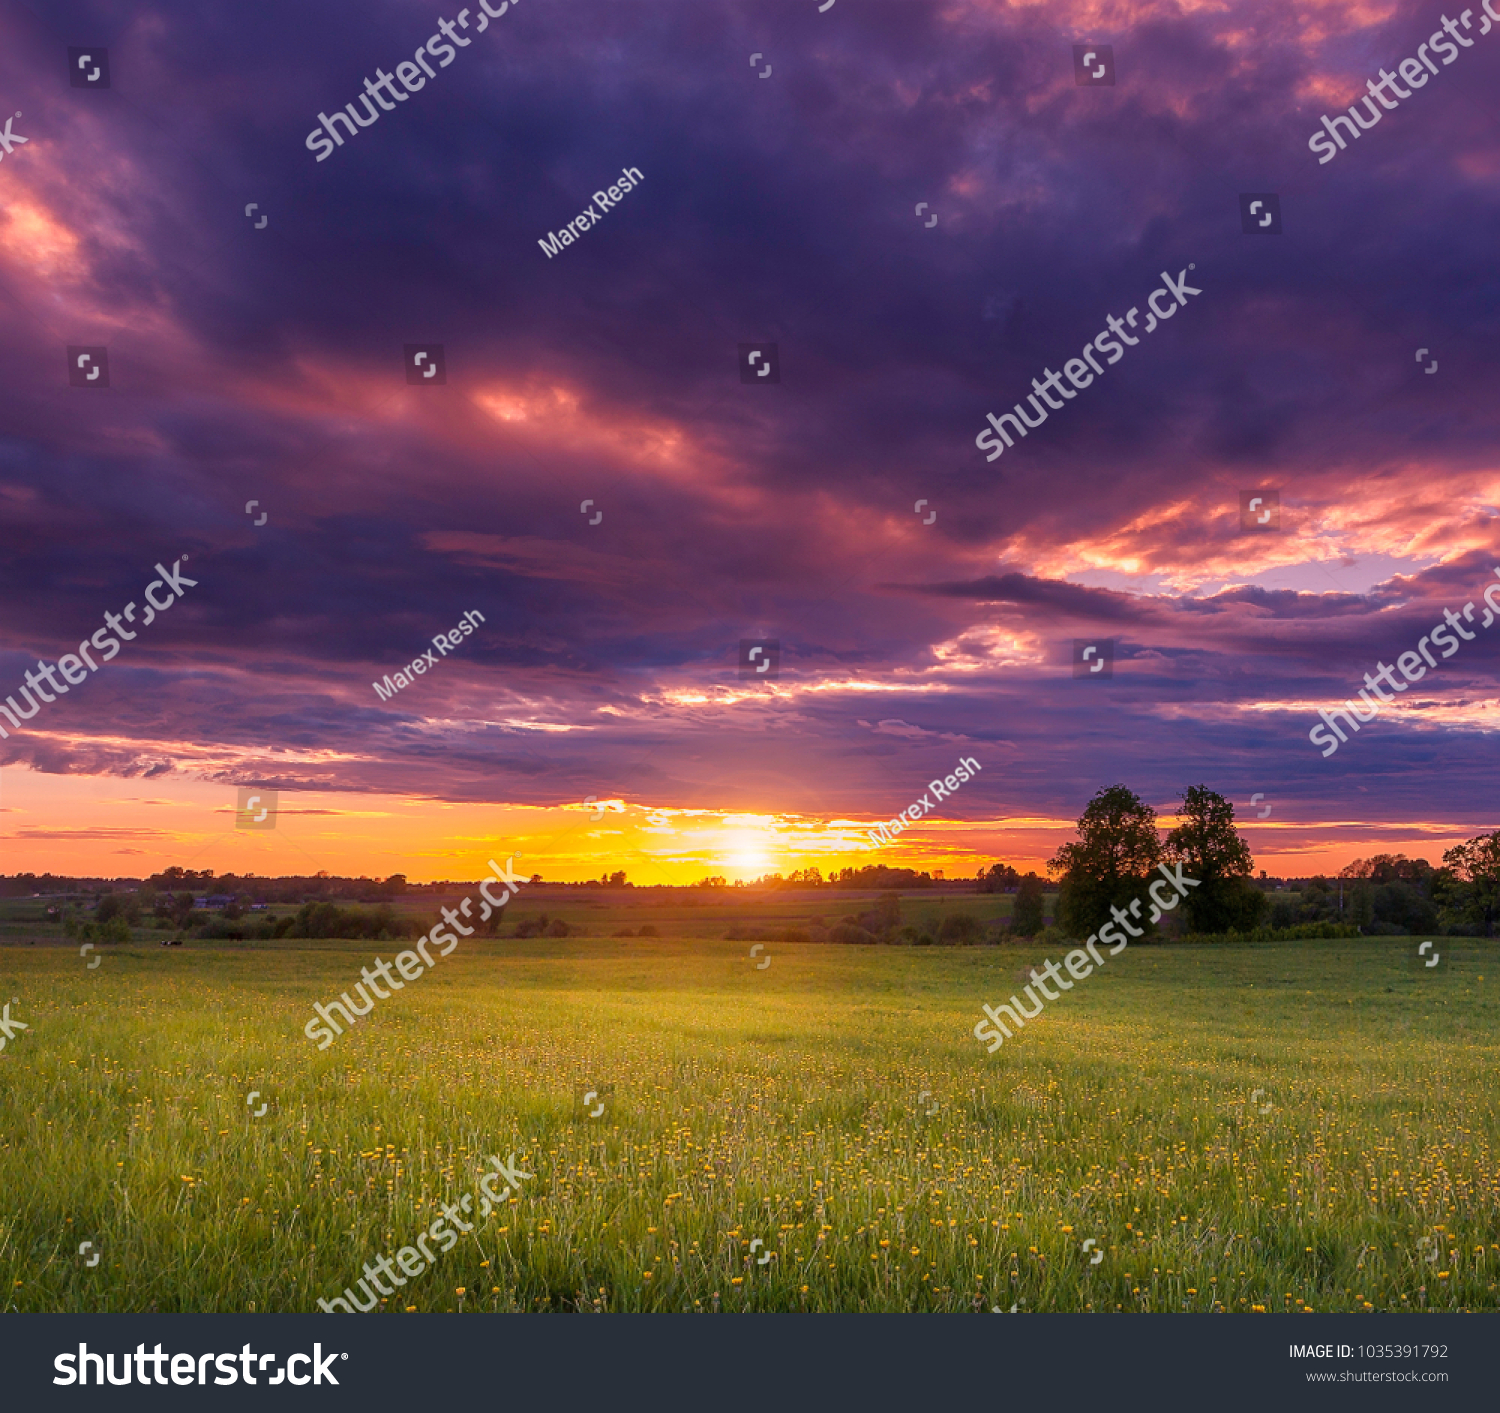 Summer sunset on the field with very beautiful light and sky #1035391792